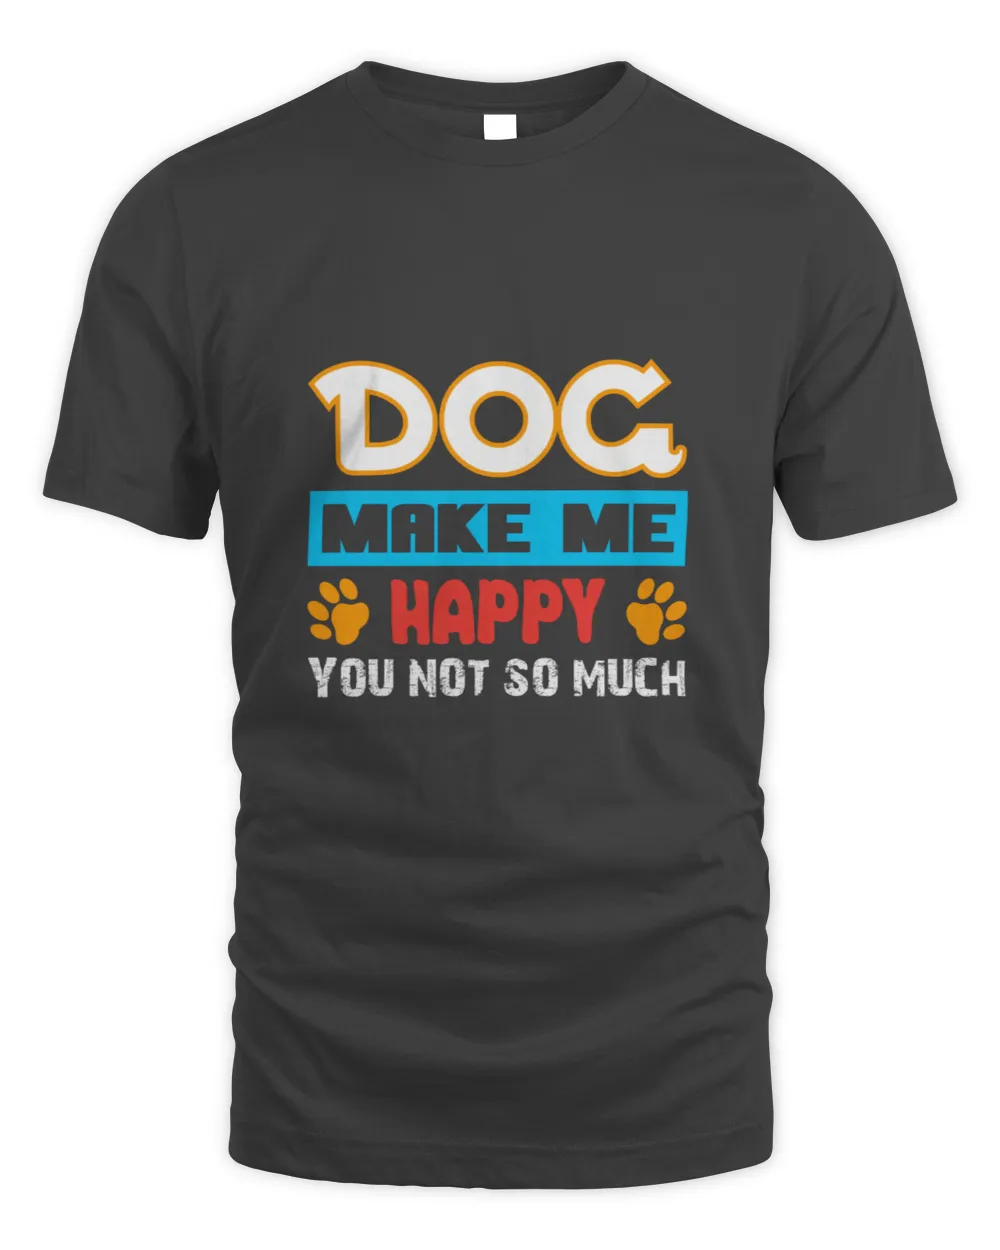 Dog make me happy, you not so much